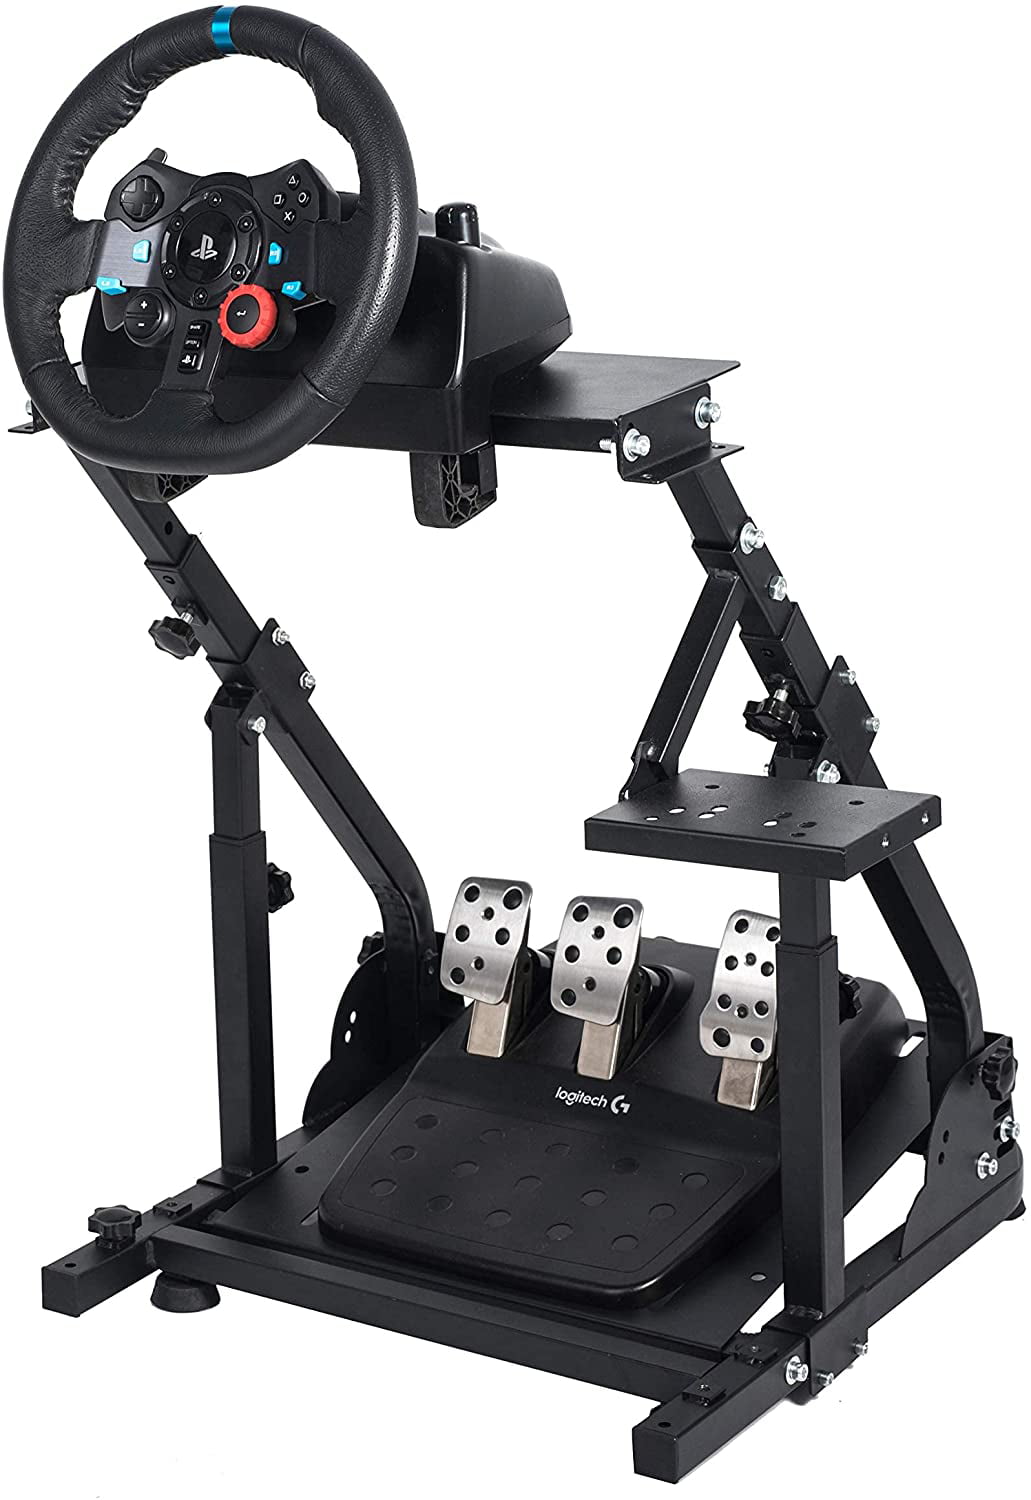 Minneer Racing Steering Wheel Stand Fit for Logitech G25,G27,G29,G920  Gaming Racing Simulator Cockpit Wheel, Pedals Not Include 